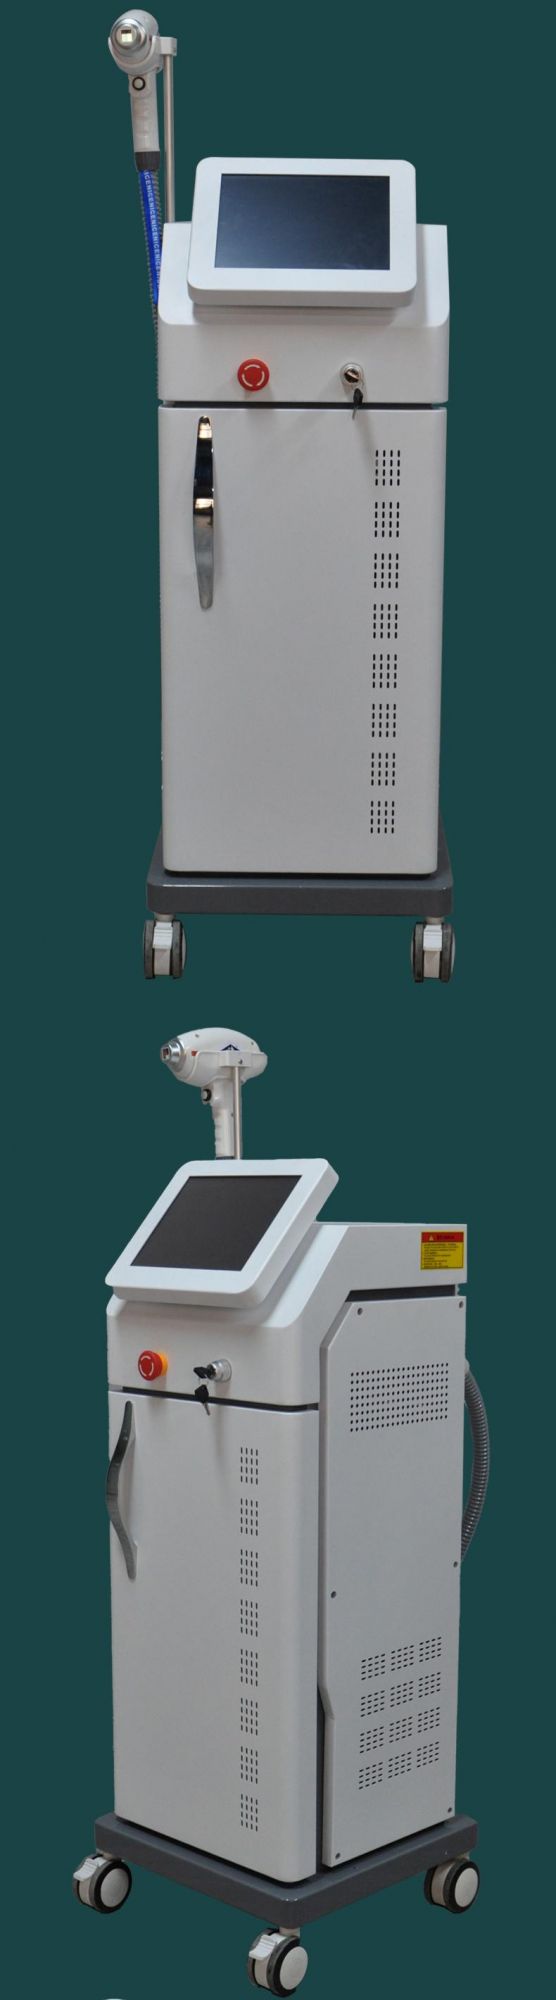 Top 1 Sale 755 808 1064 Diode Laser Hair Removal Machine Price Portable